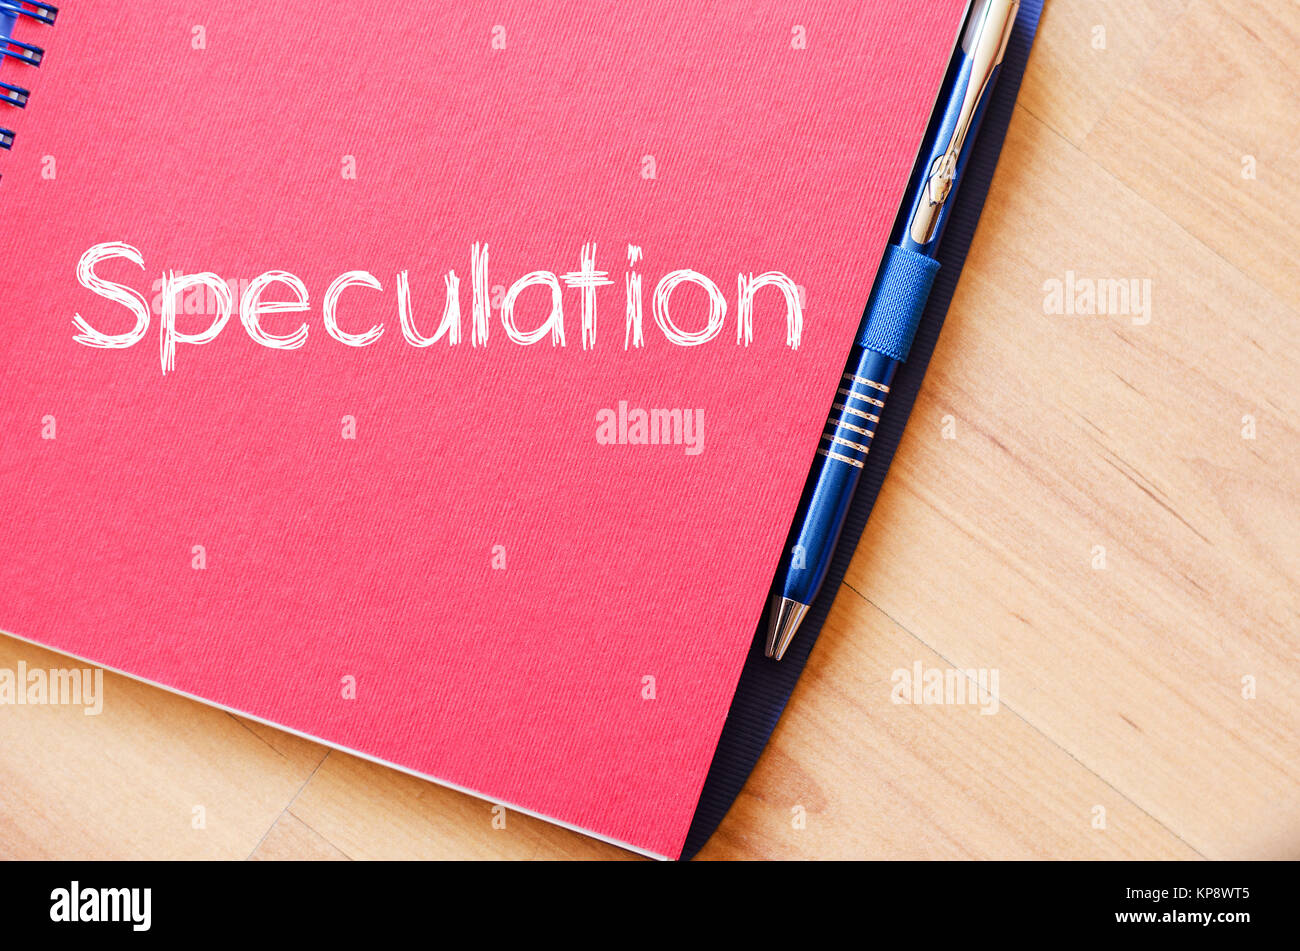 Speculation write on notebook Stock Photo